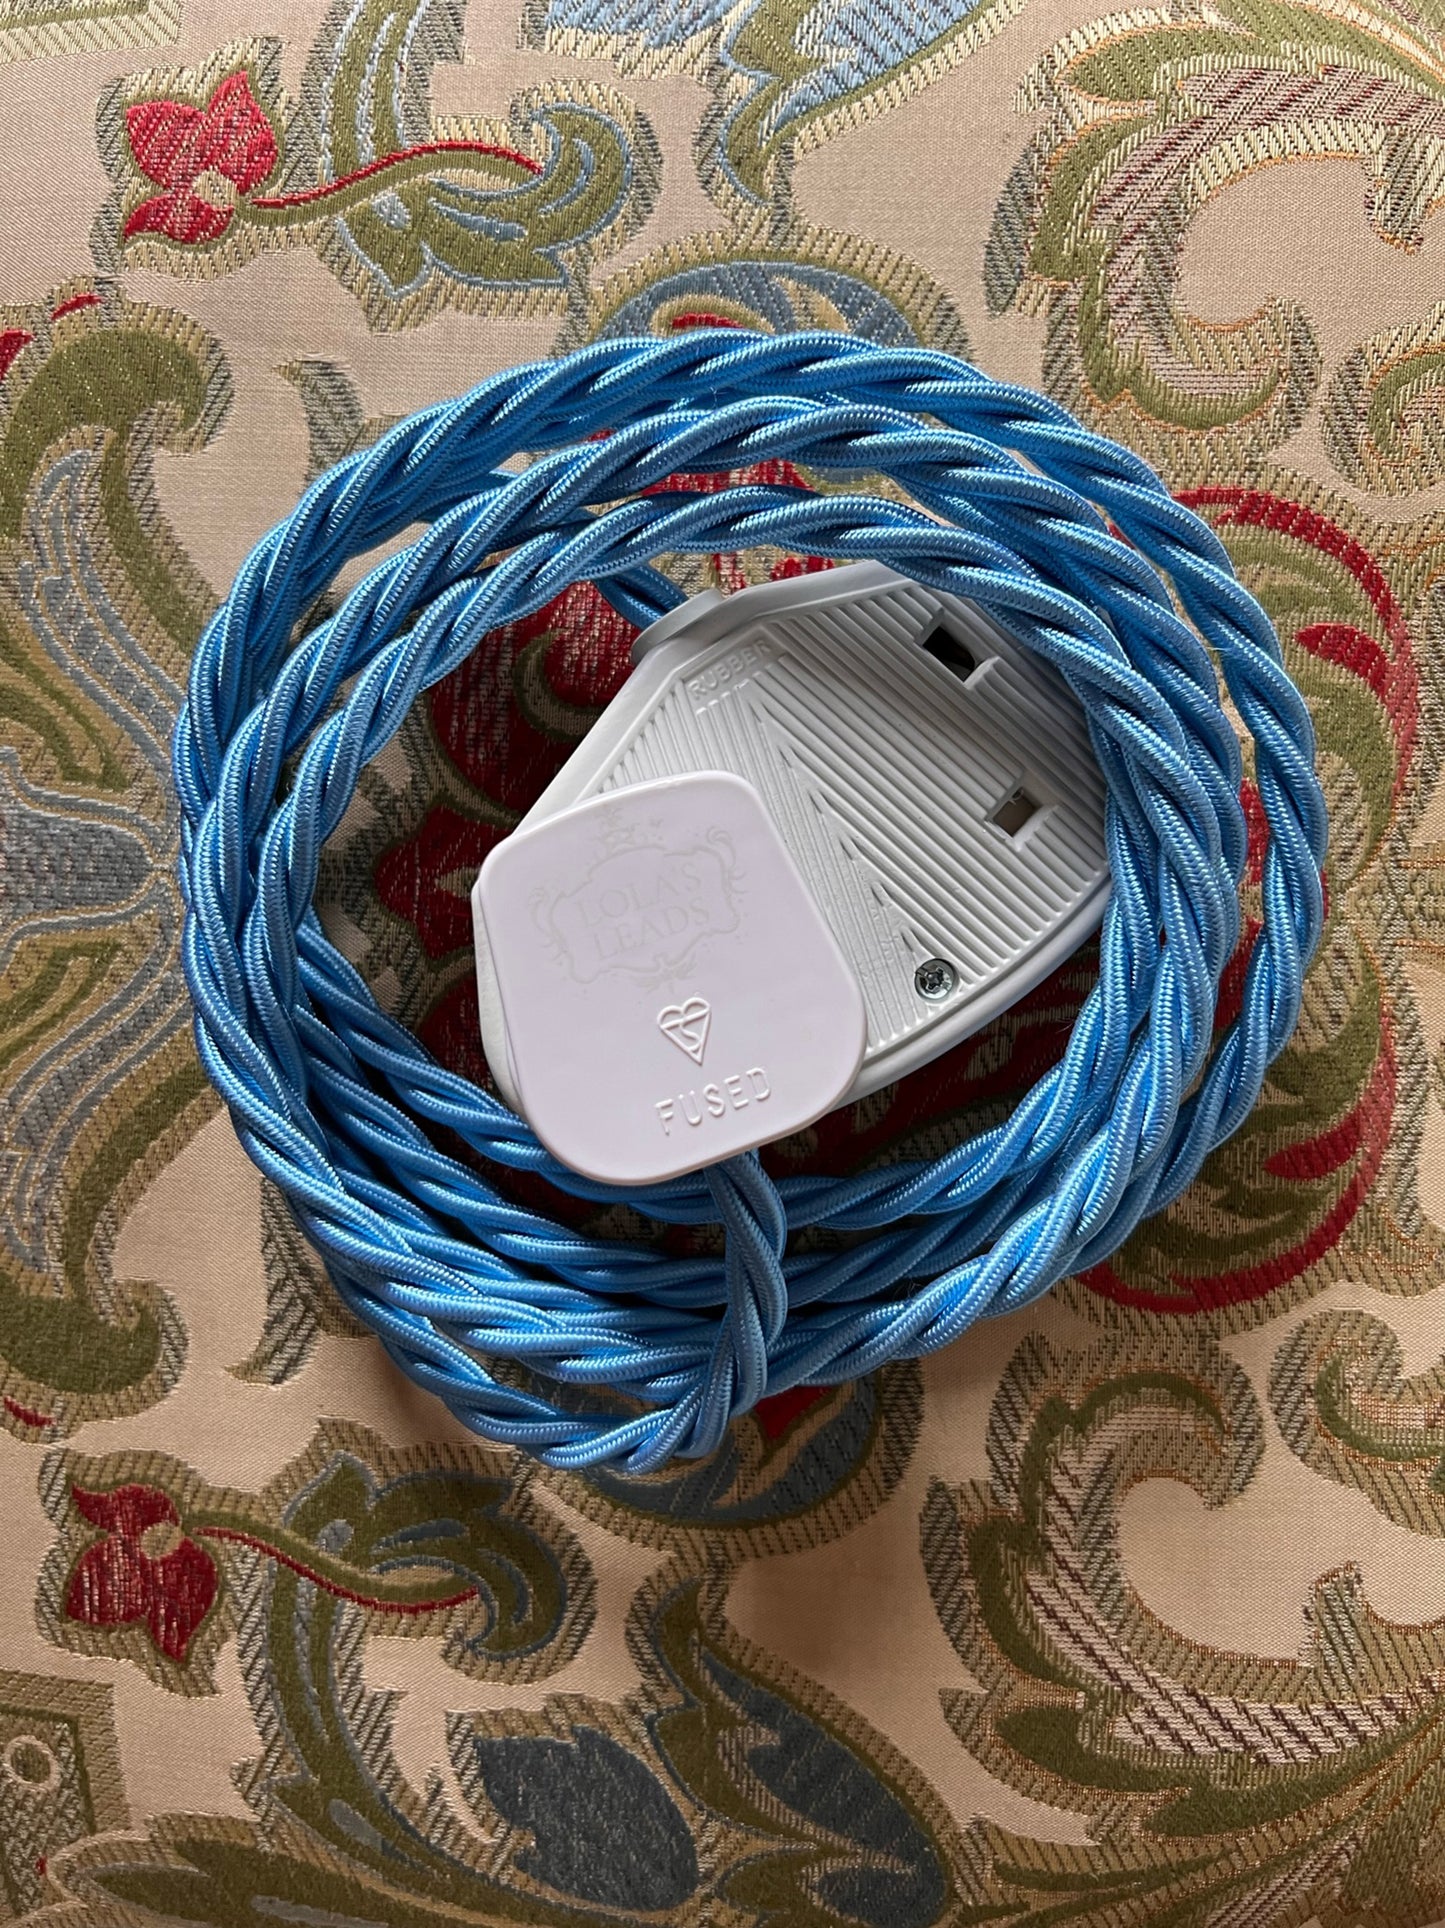 Forget Me Not - Lola's Leads Fabric Extension Cable